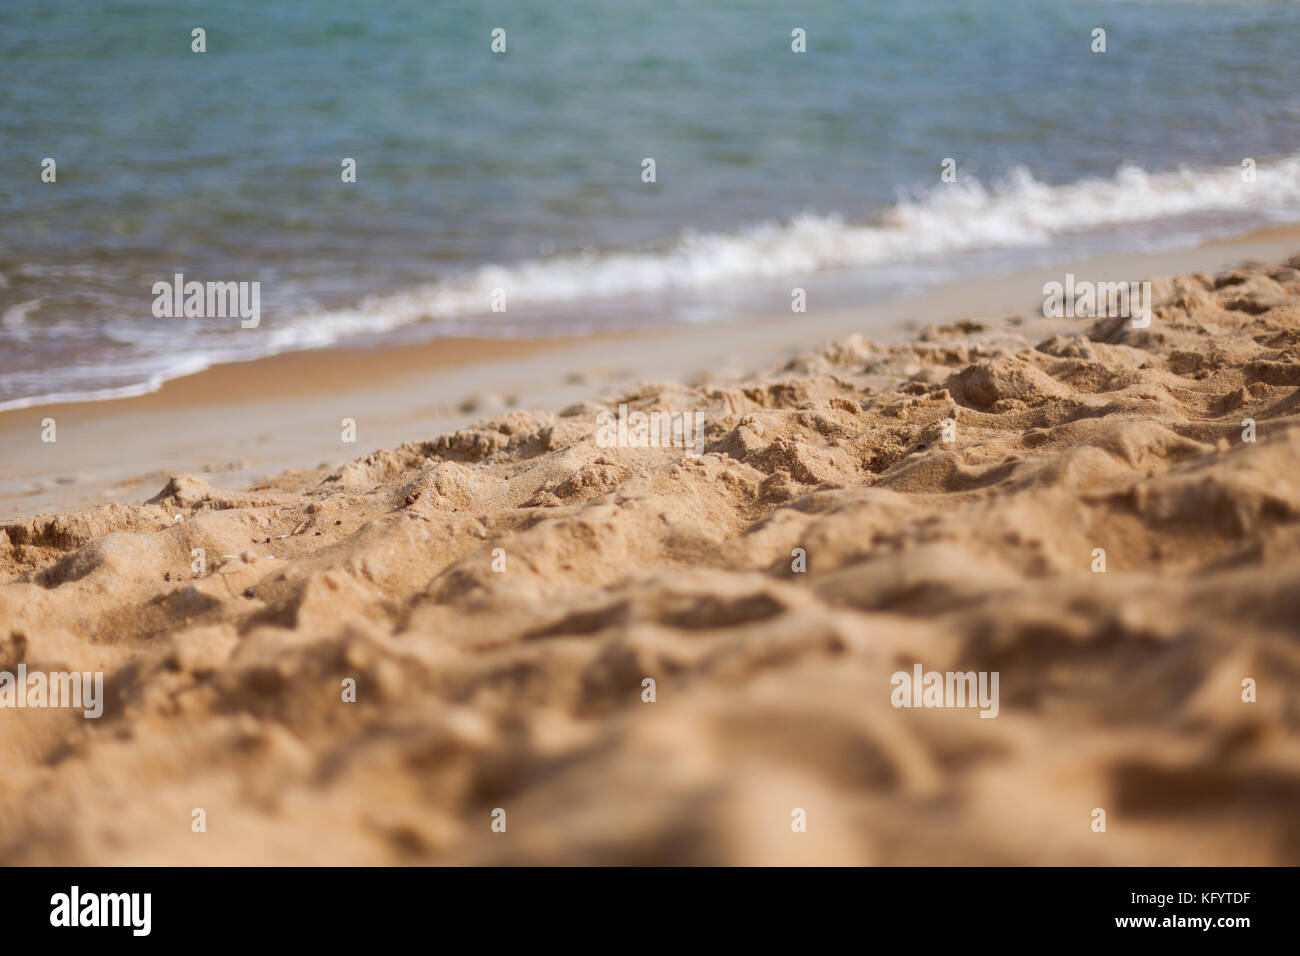 Sand selectively focused at the beach Stock Photo